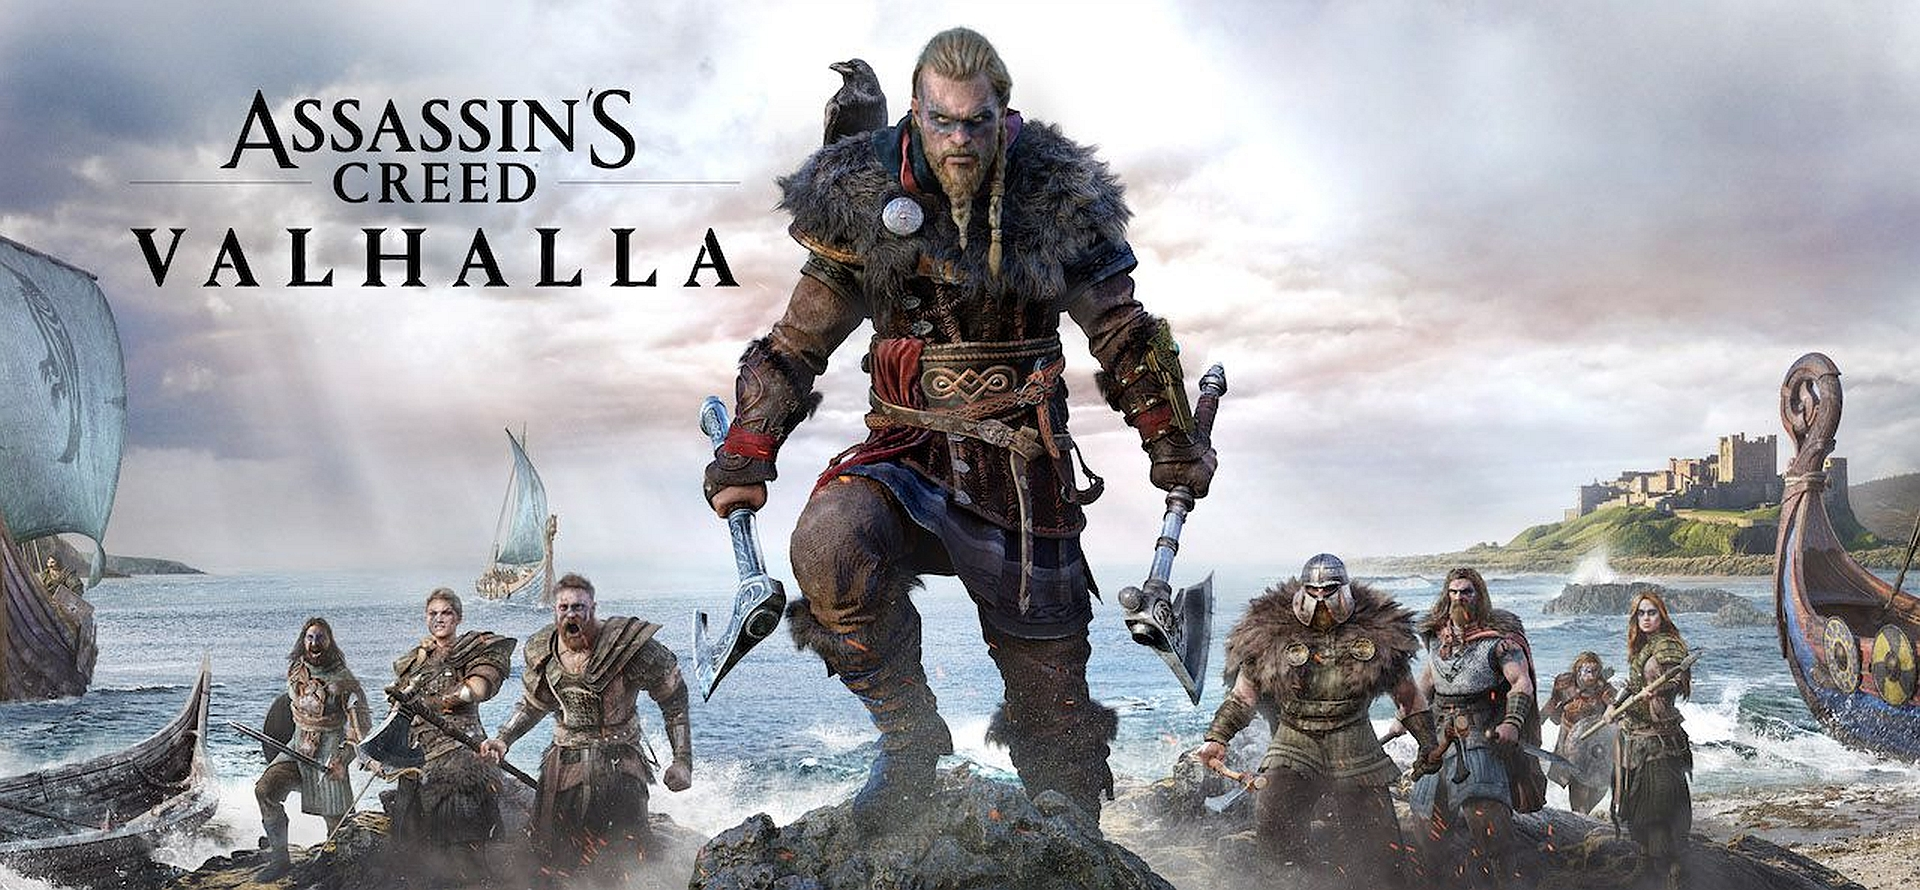 When will Assassin's Creed Valhalla release?